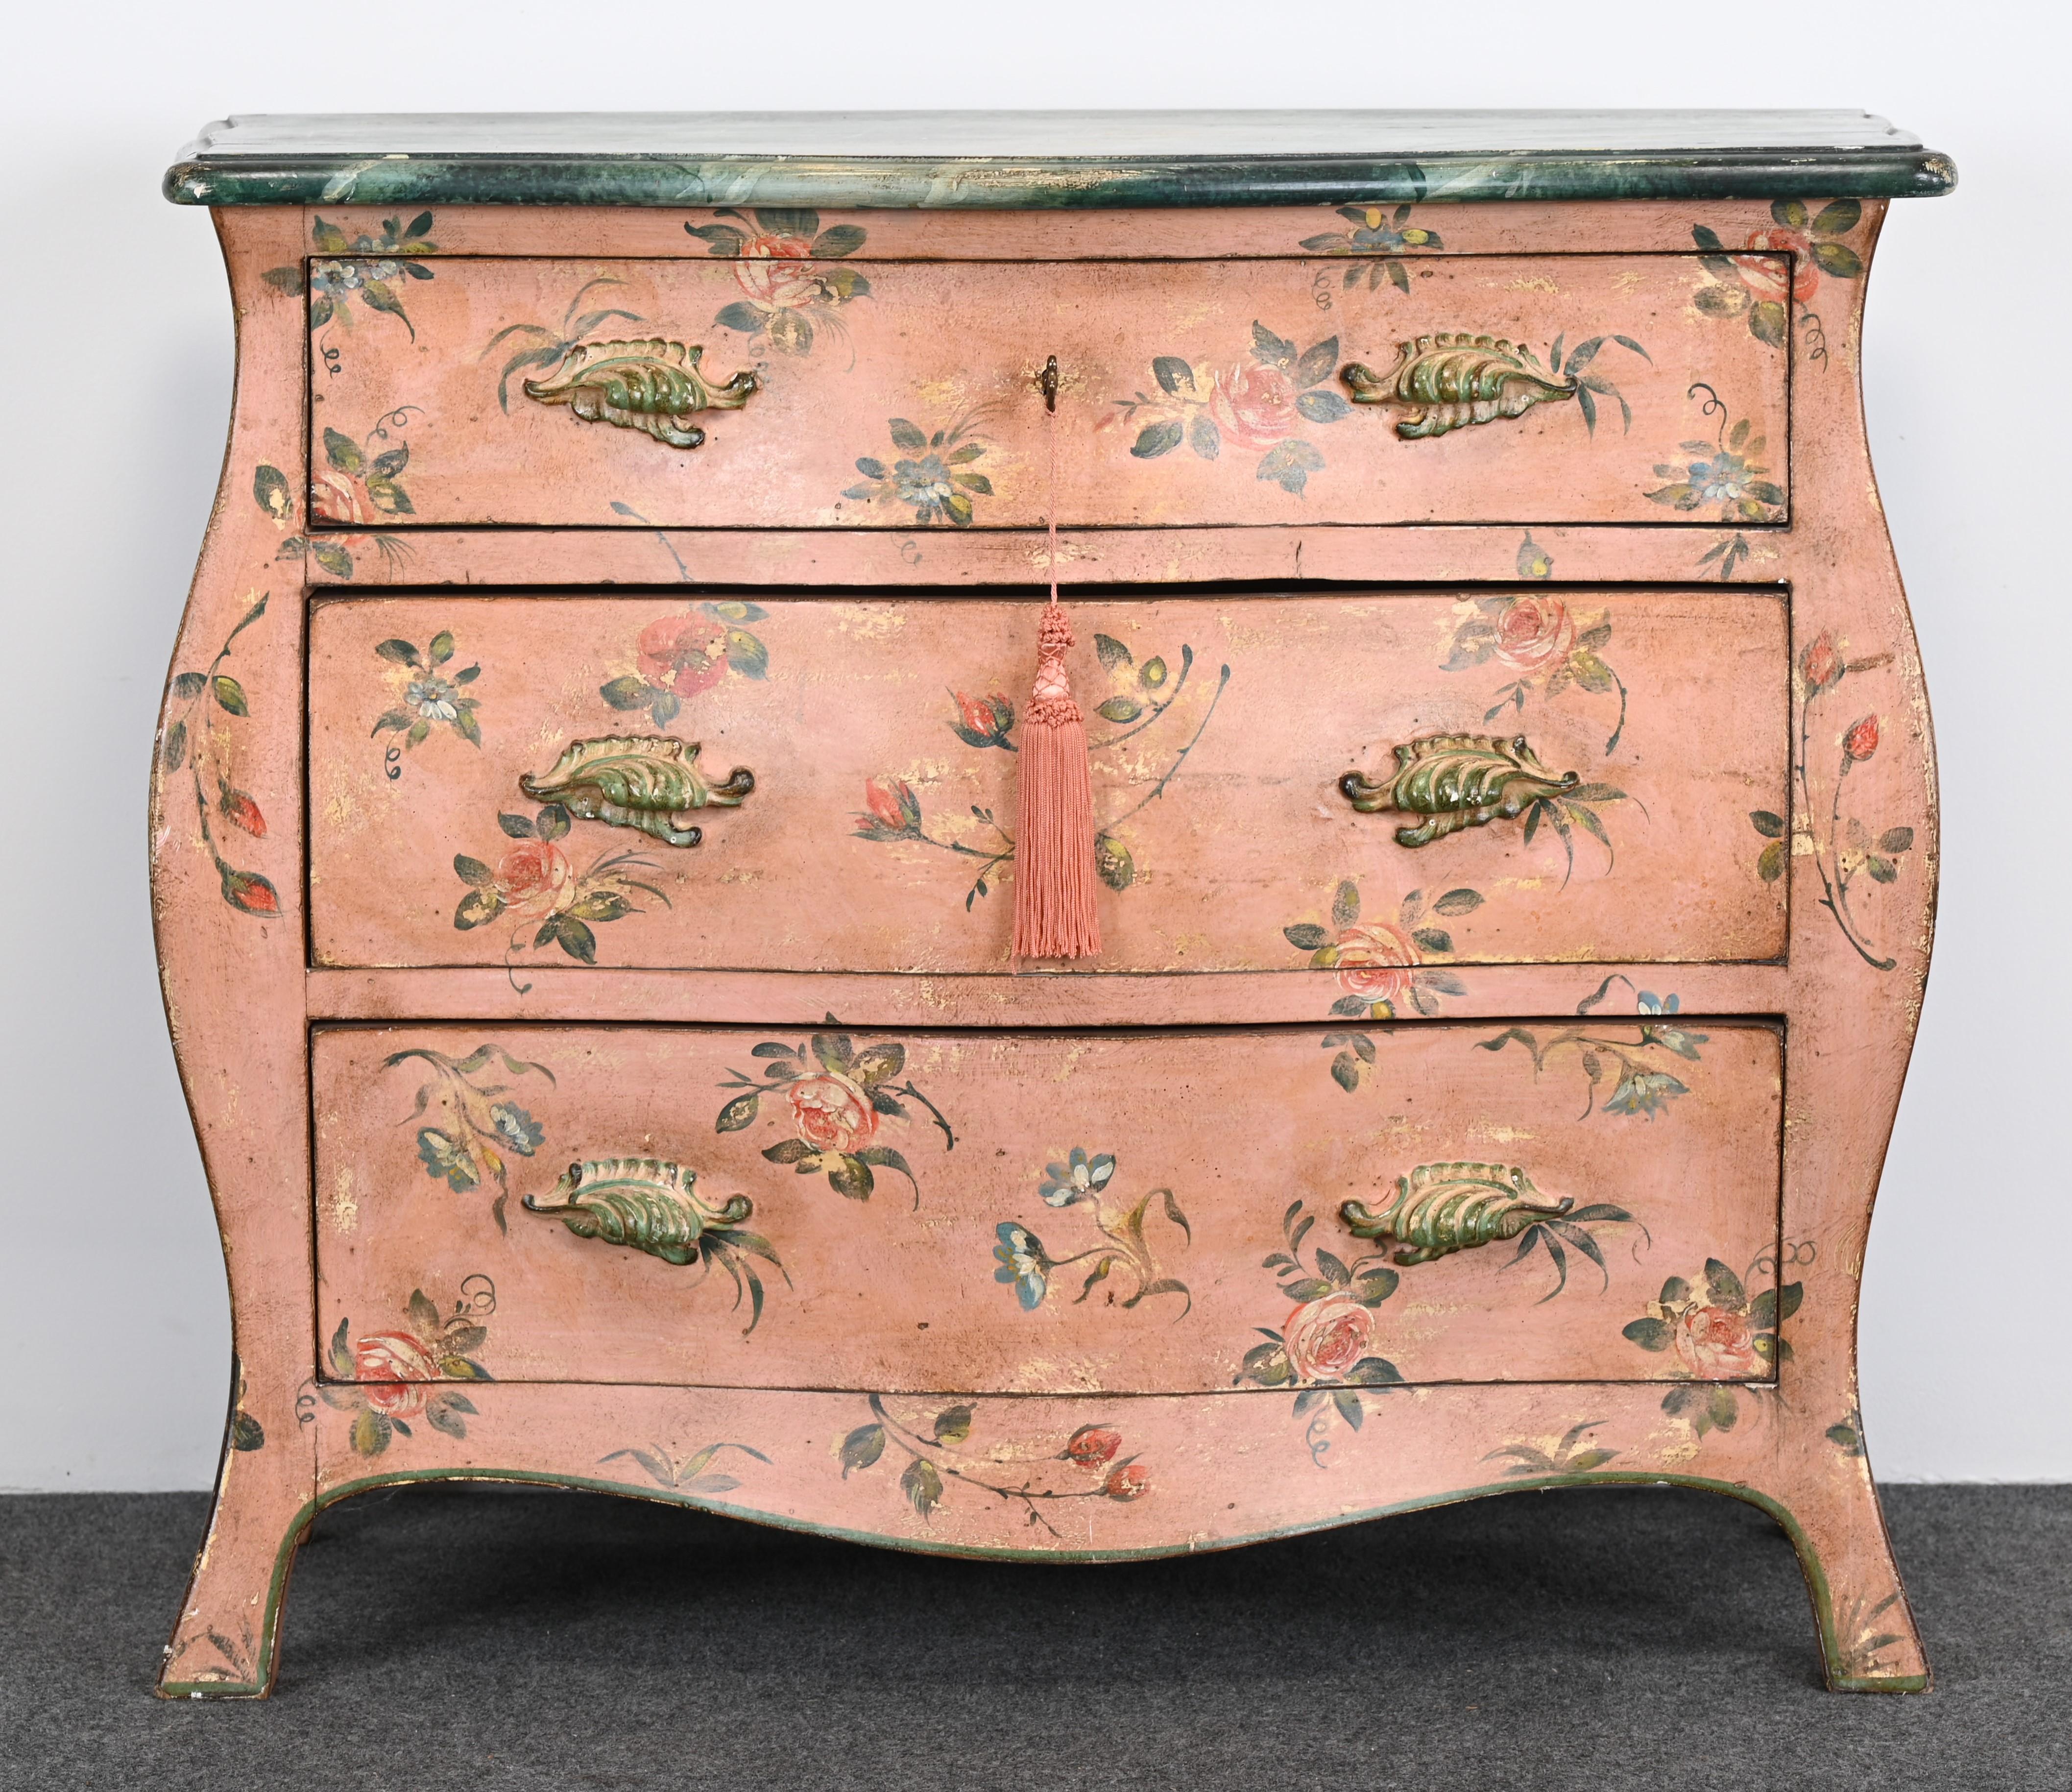 A lovely hand-painted Bombe or Bombay Chest of Drawers by Patina Furniture Company, 1980s. This Italian chest has a beautiful hand-painted aged patinated finish and a faux marble top. The chest has nice carved handles with a brass key that has a